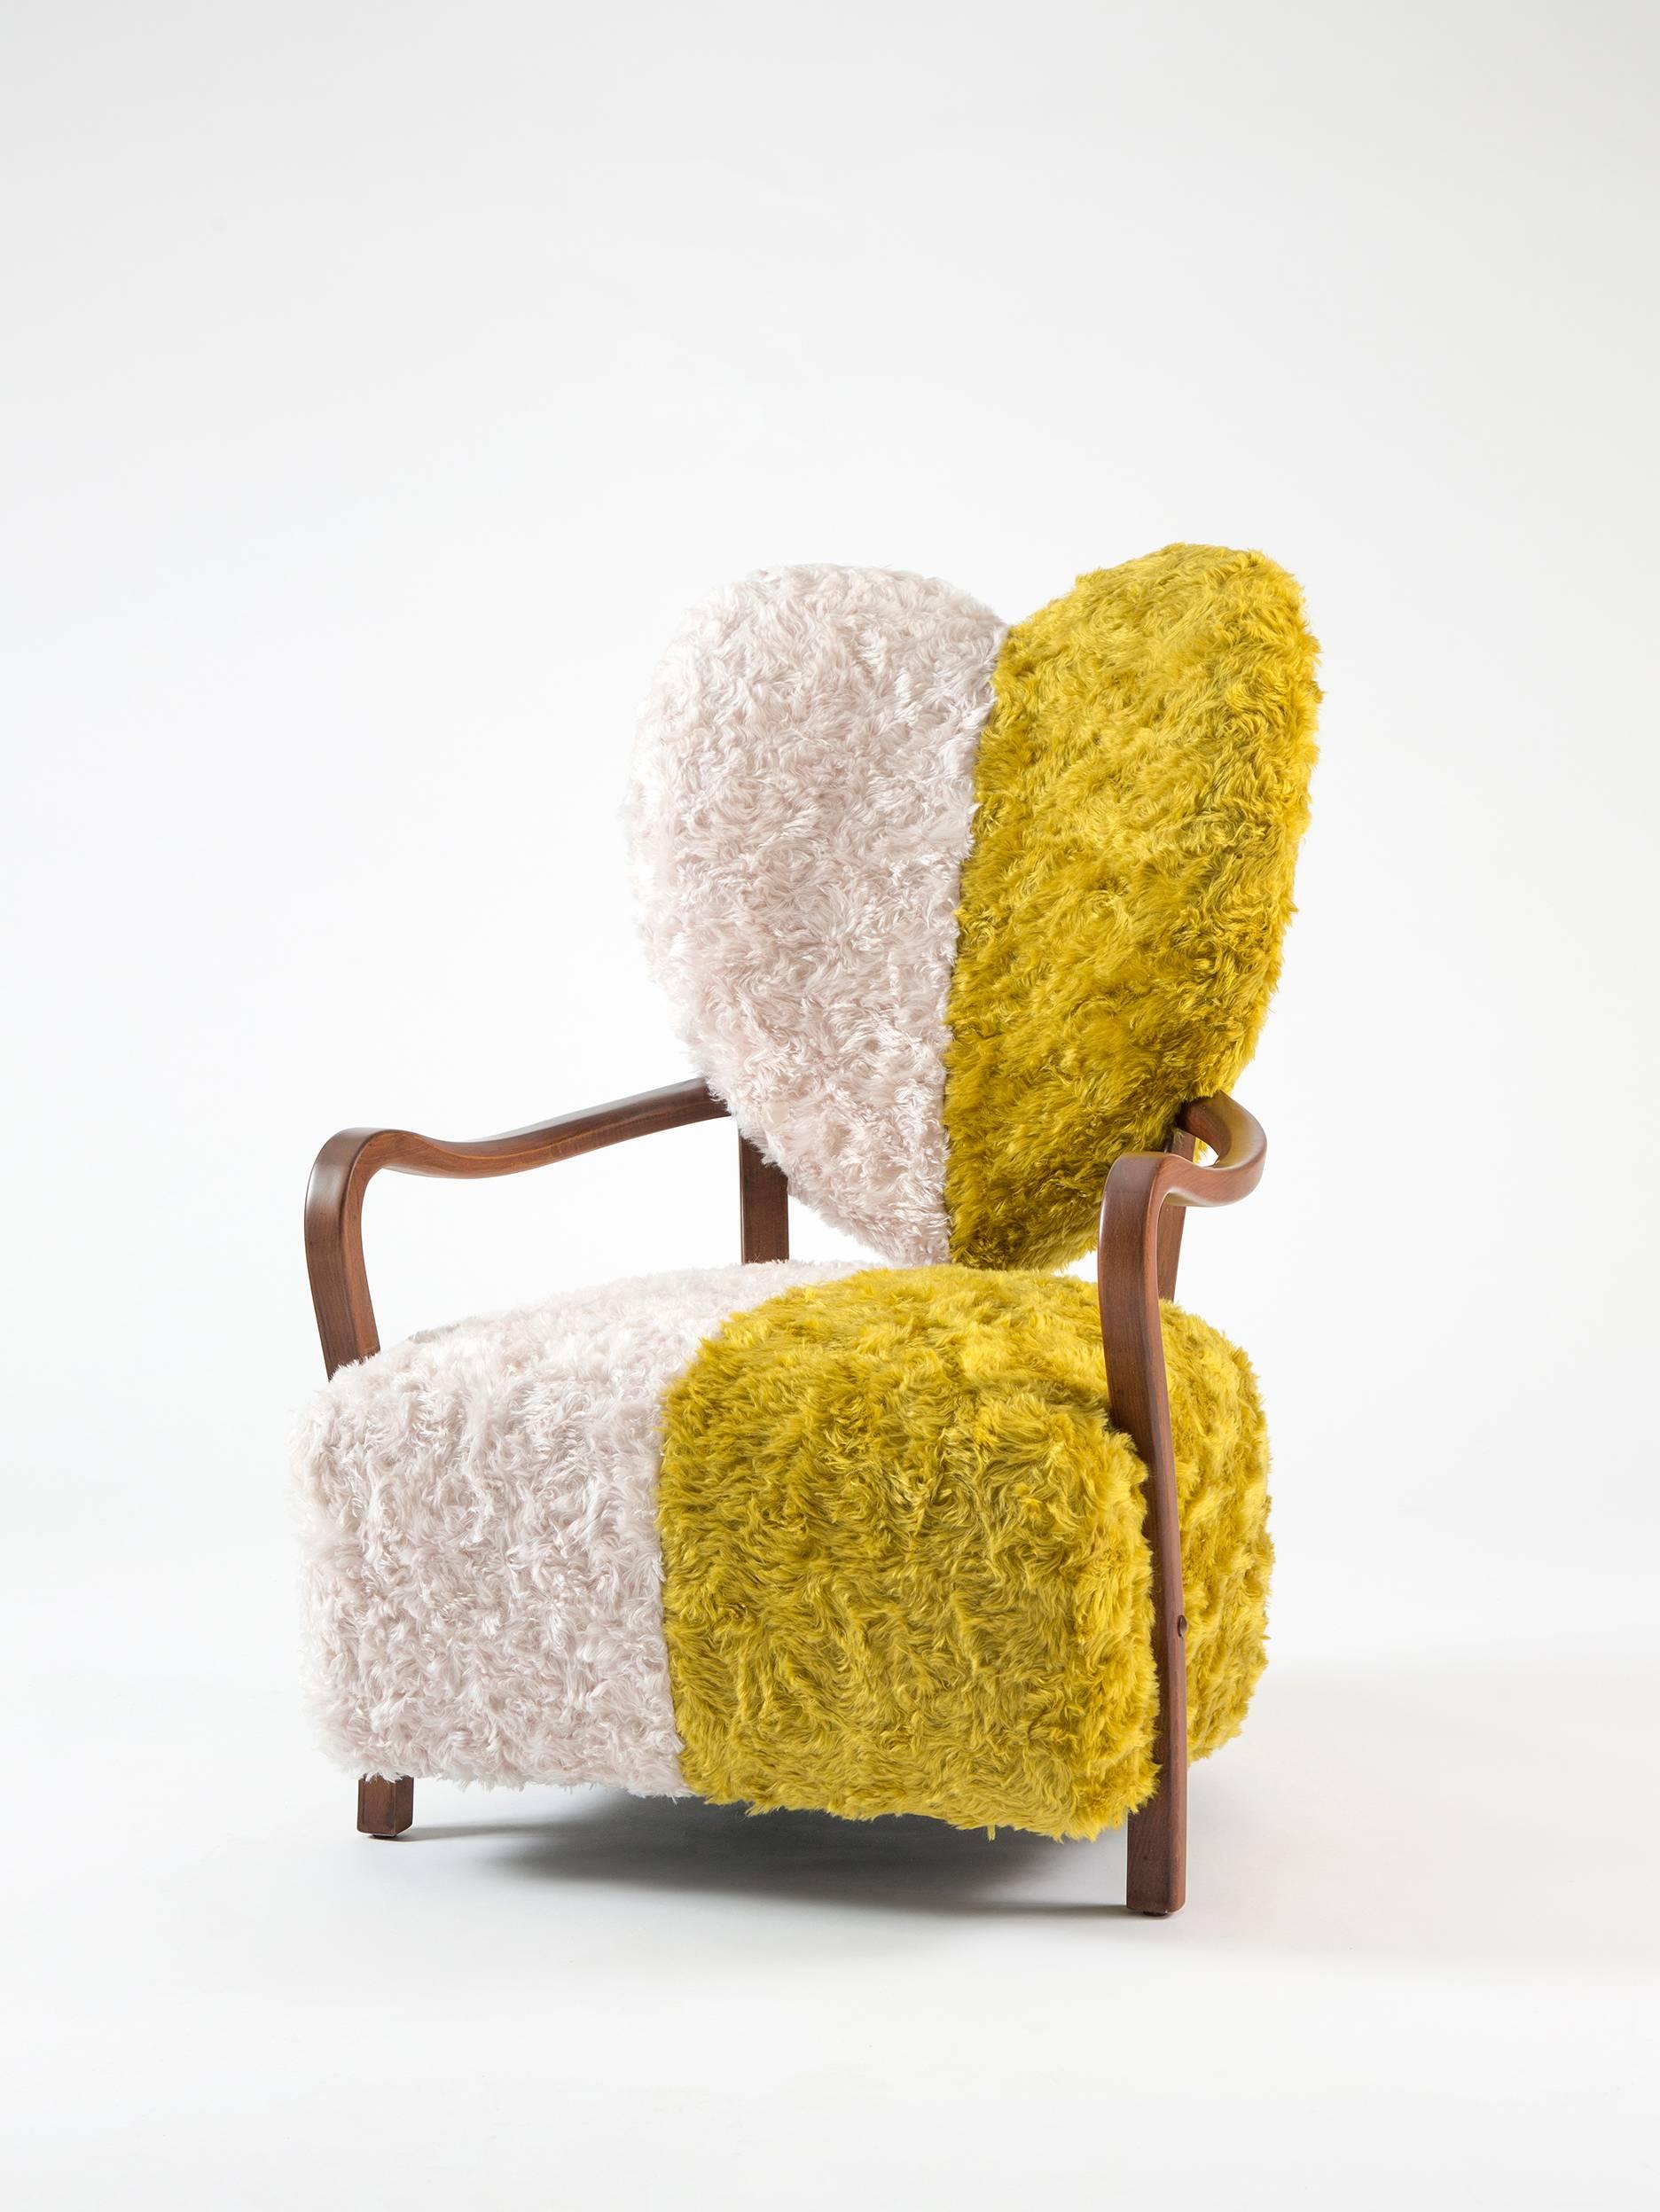 Dedicated to all the broken hearts, Uni represents both separation and unification of souls. Contrasting of yellow and white reflect the differences between any two living things and the beauty of their combination. 

Uni is upholstered with %100